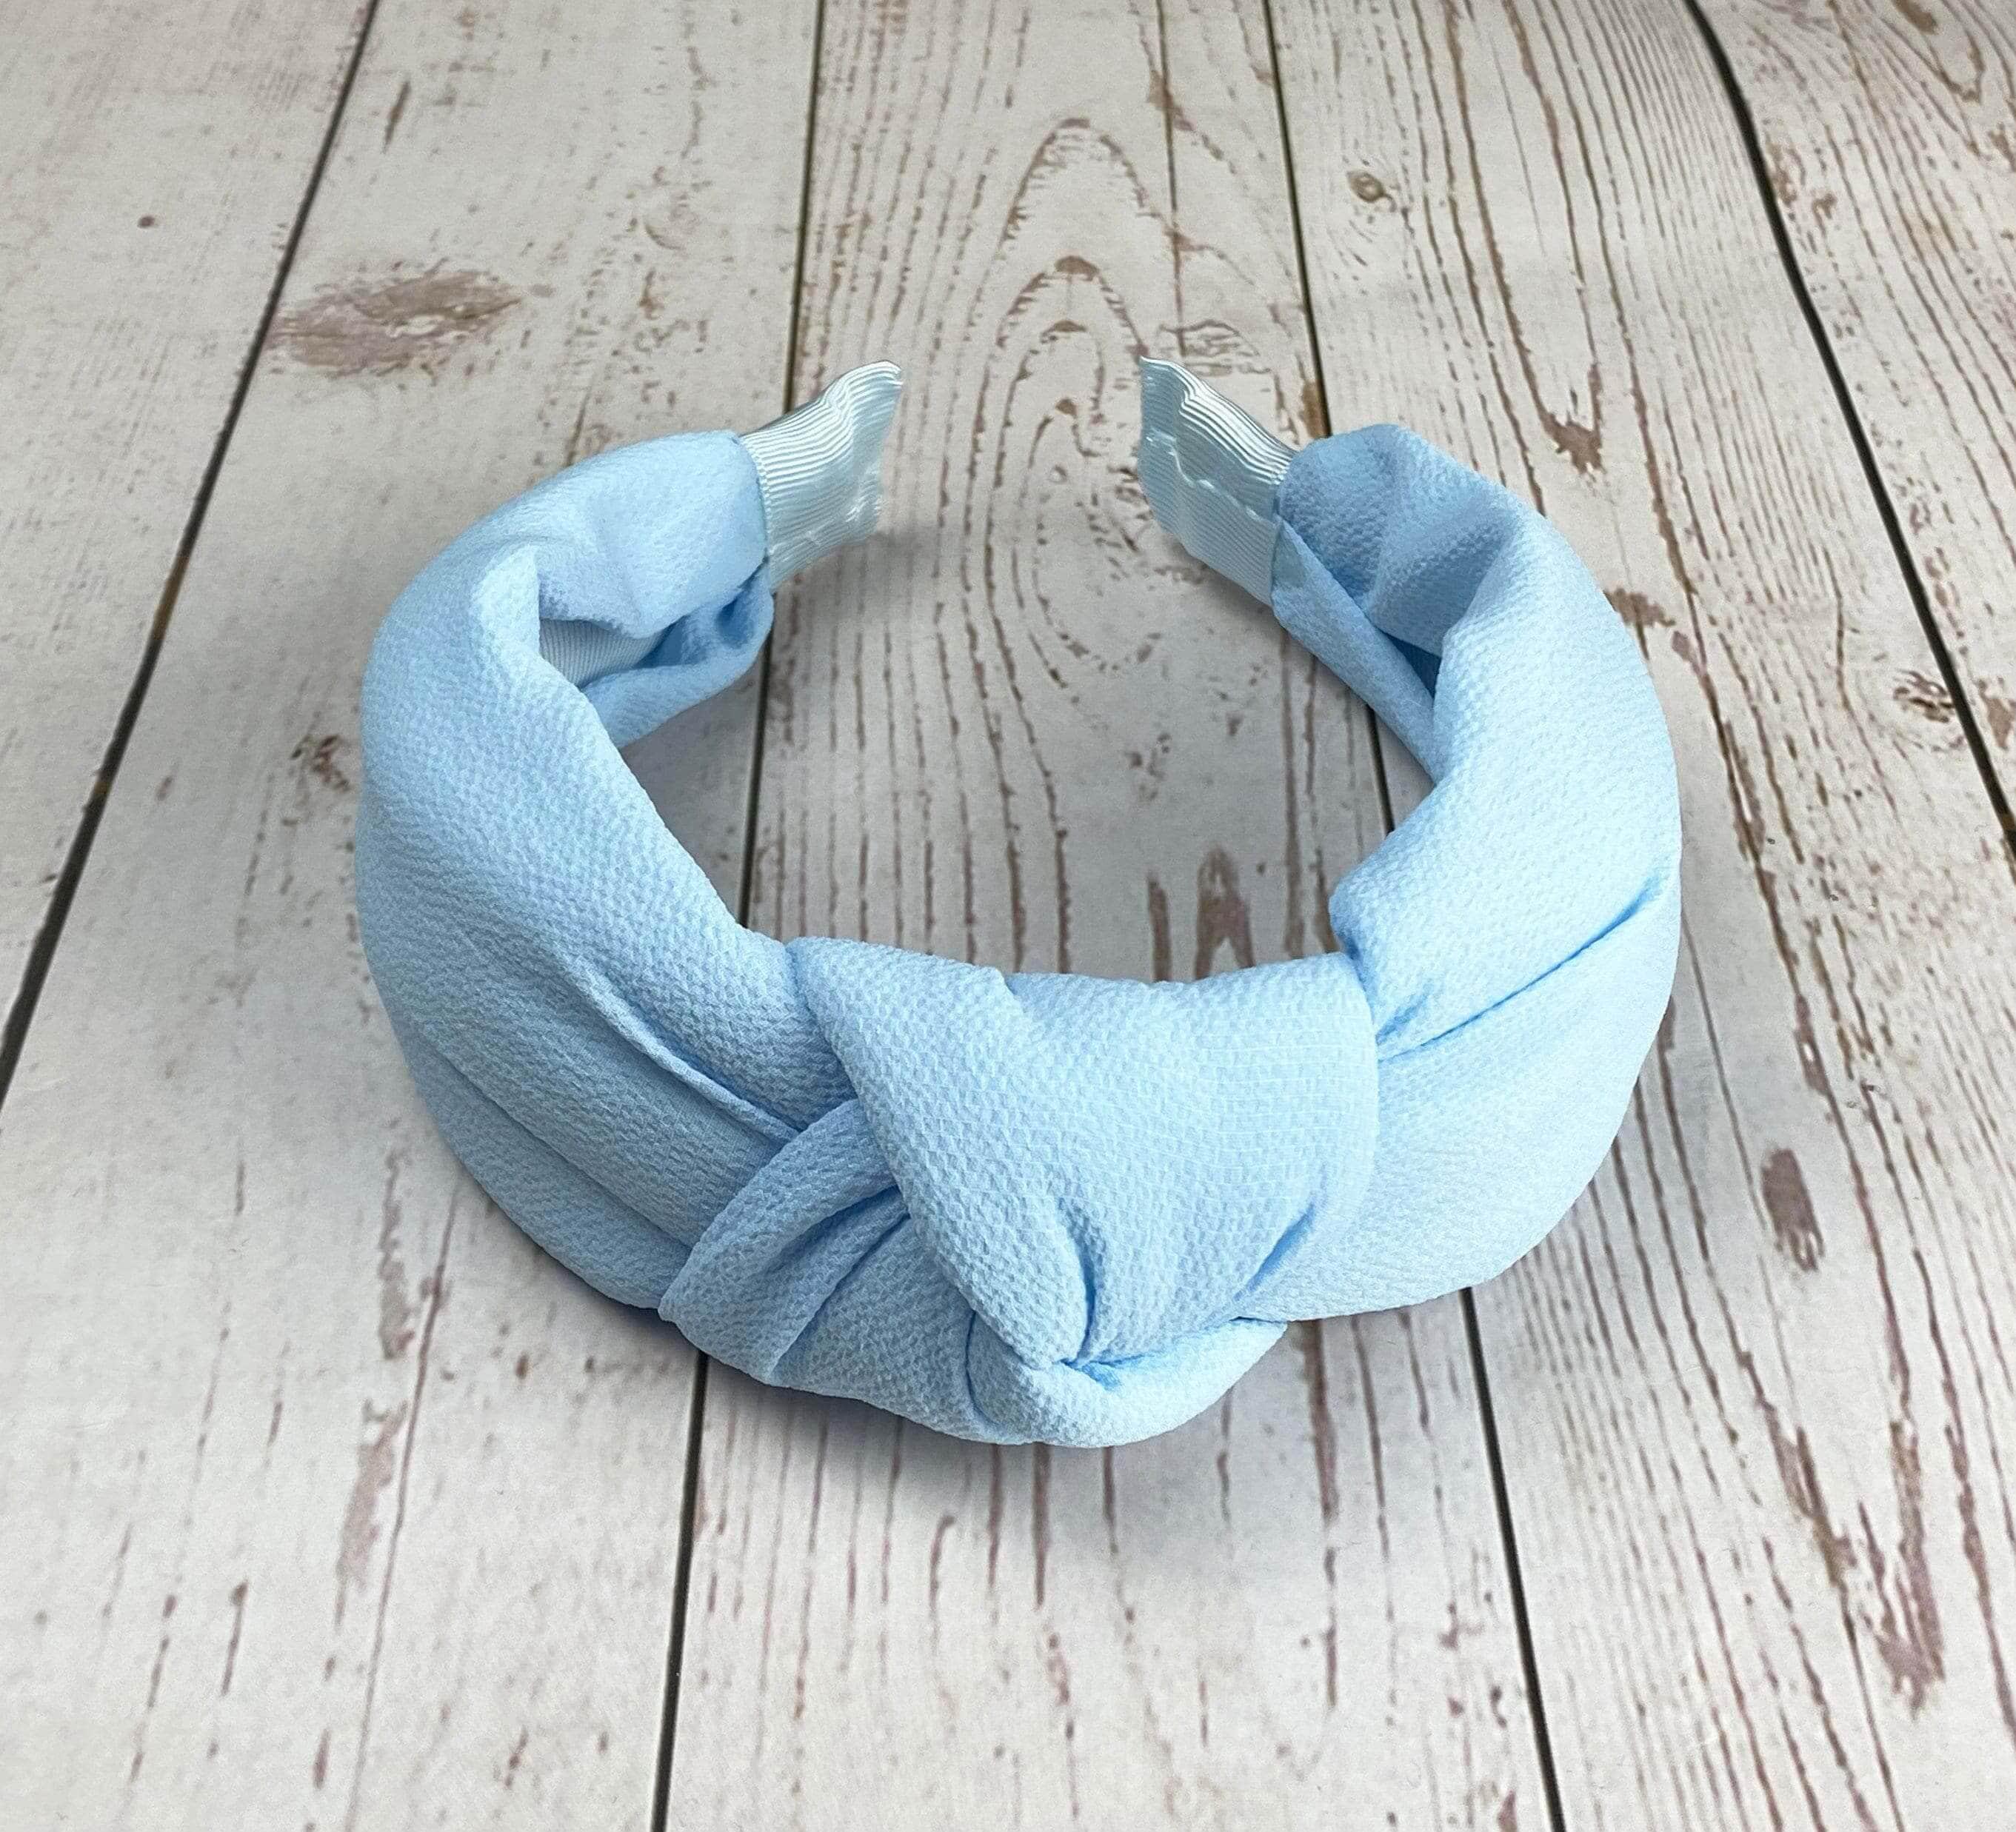 Exquisite Baby Blue Twist Knot Headband - Fashionable Women's Hairband with Viscose Crepe Padding available at Moyoni Design